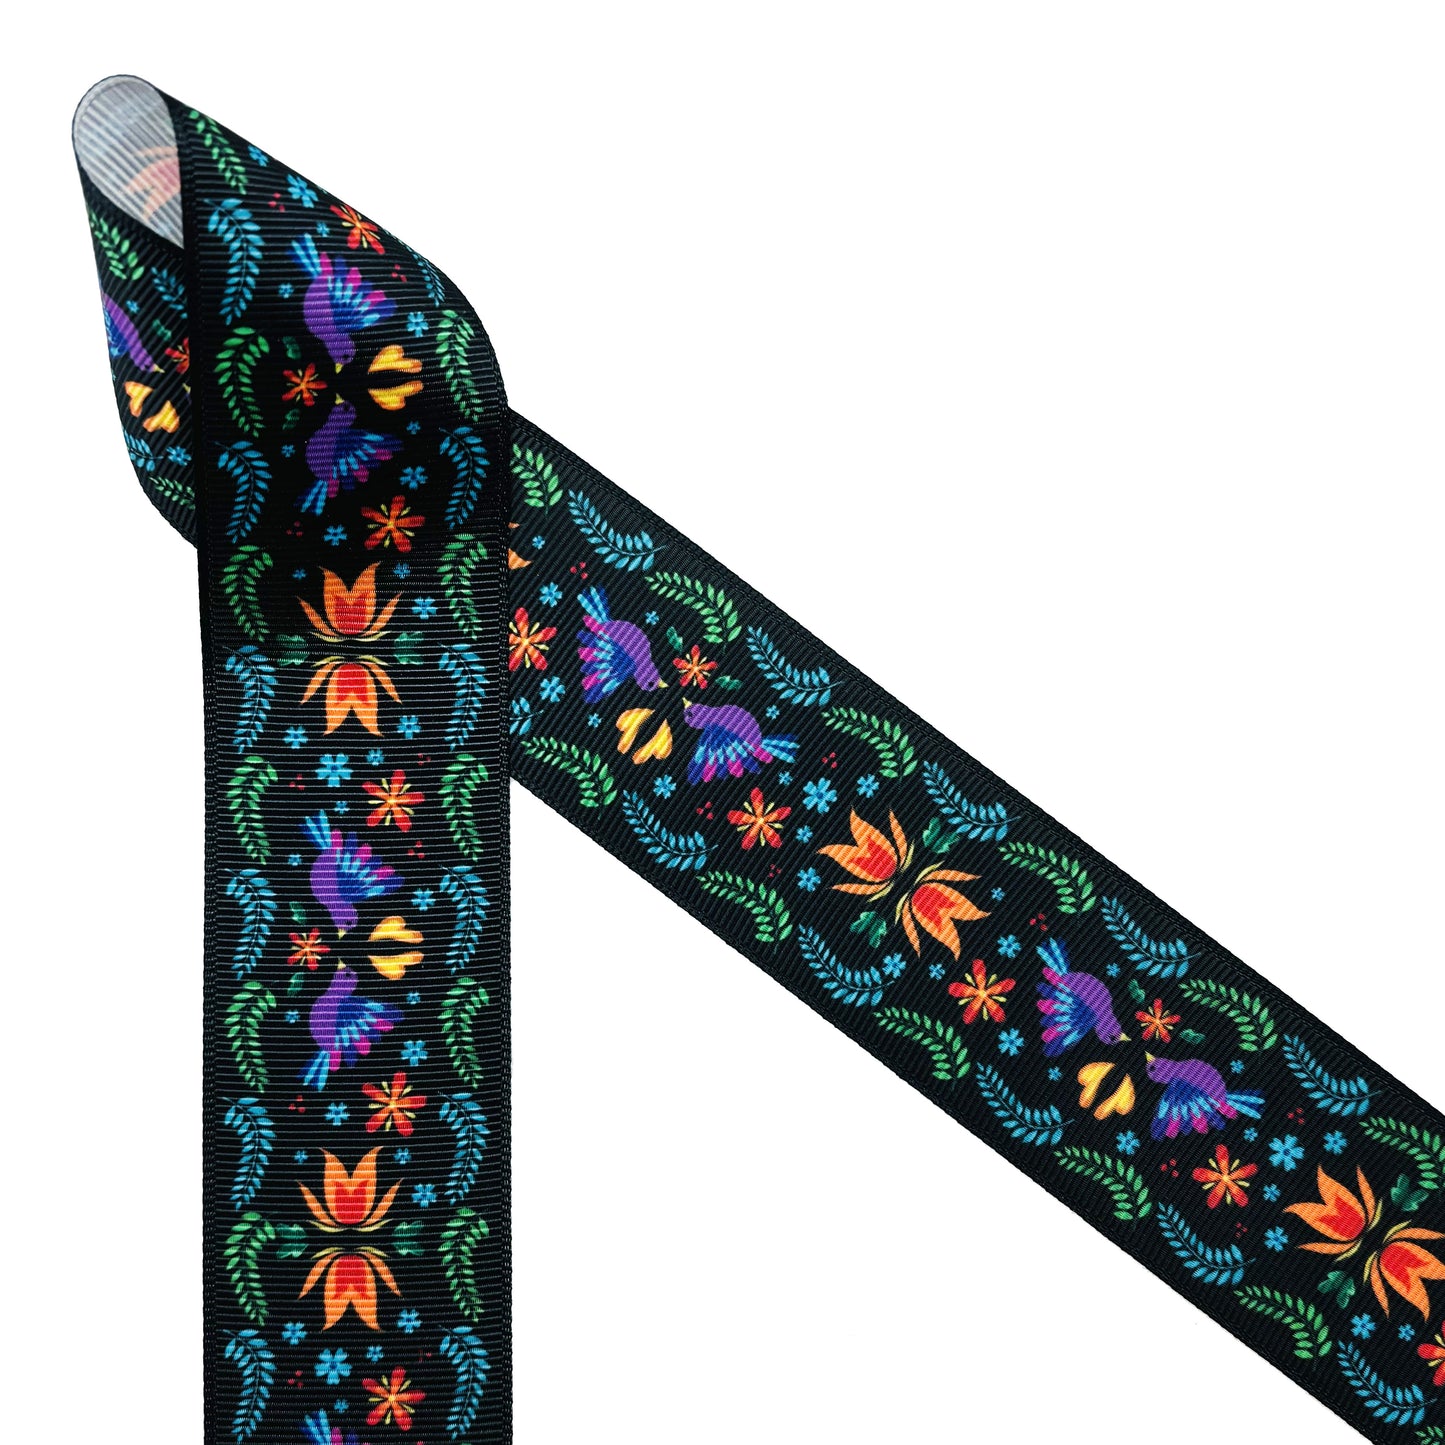 Mexican Floral Ribbon flowers of orange and turquoise with purple birds and green flora on a black background printed on 1.5" satin and grosgrain